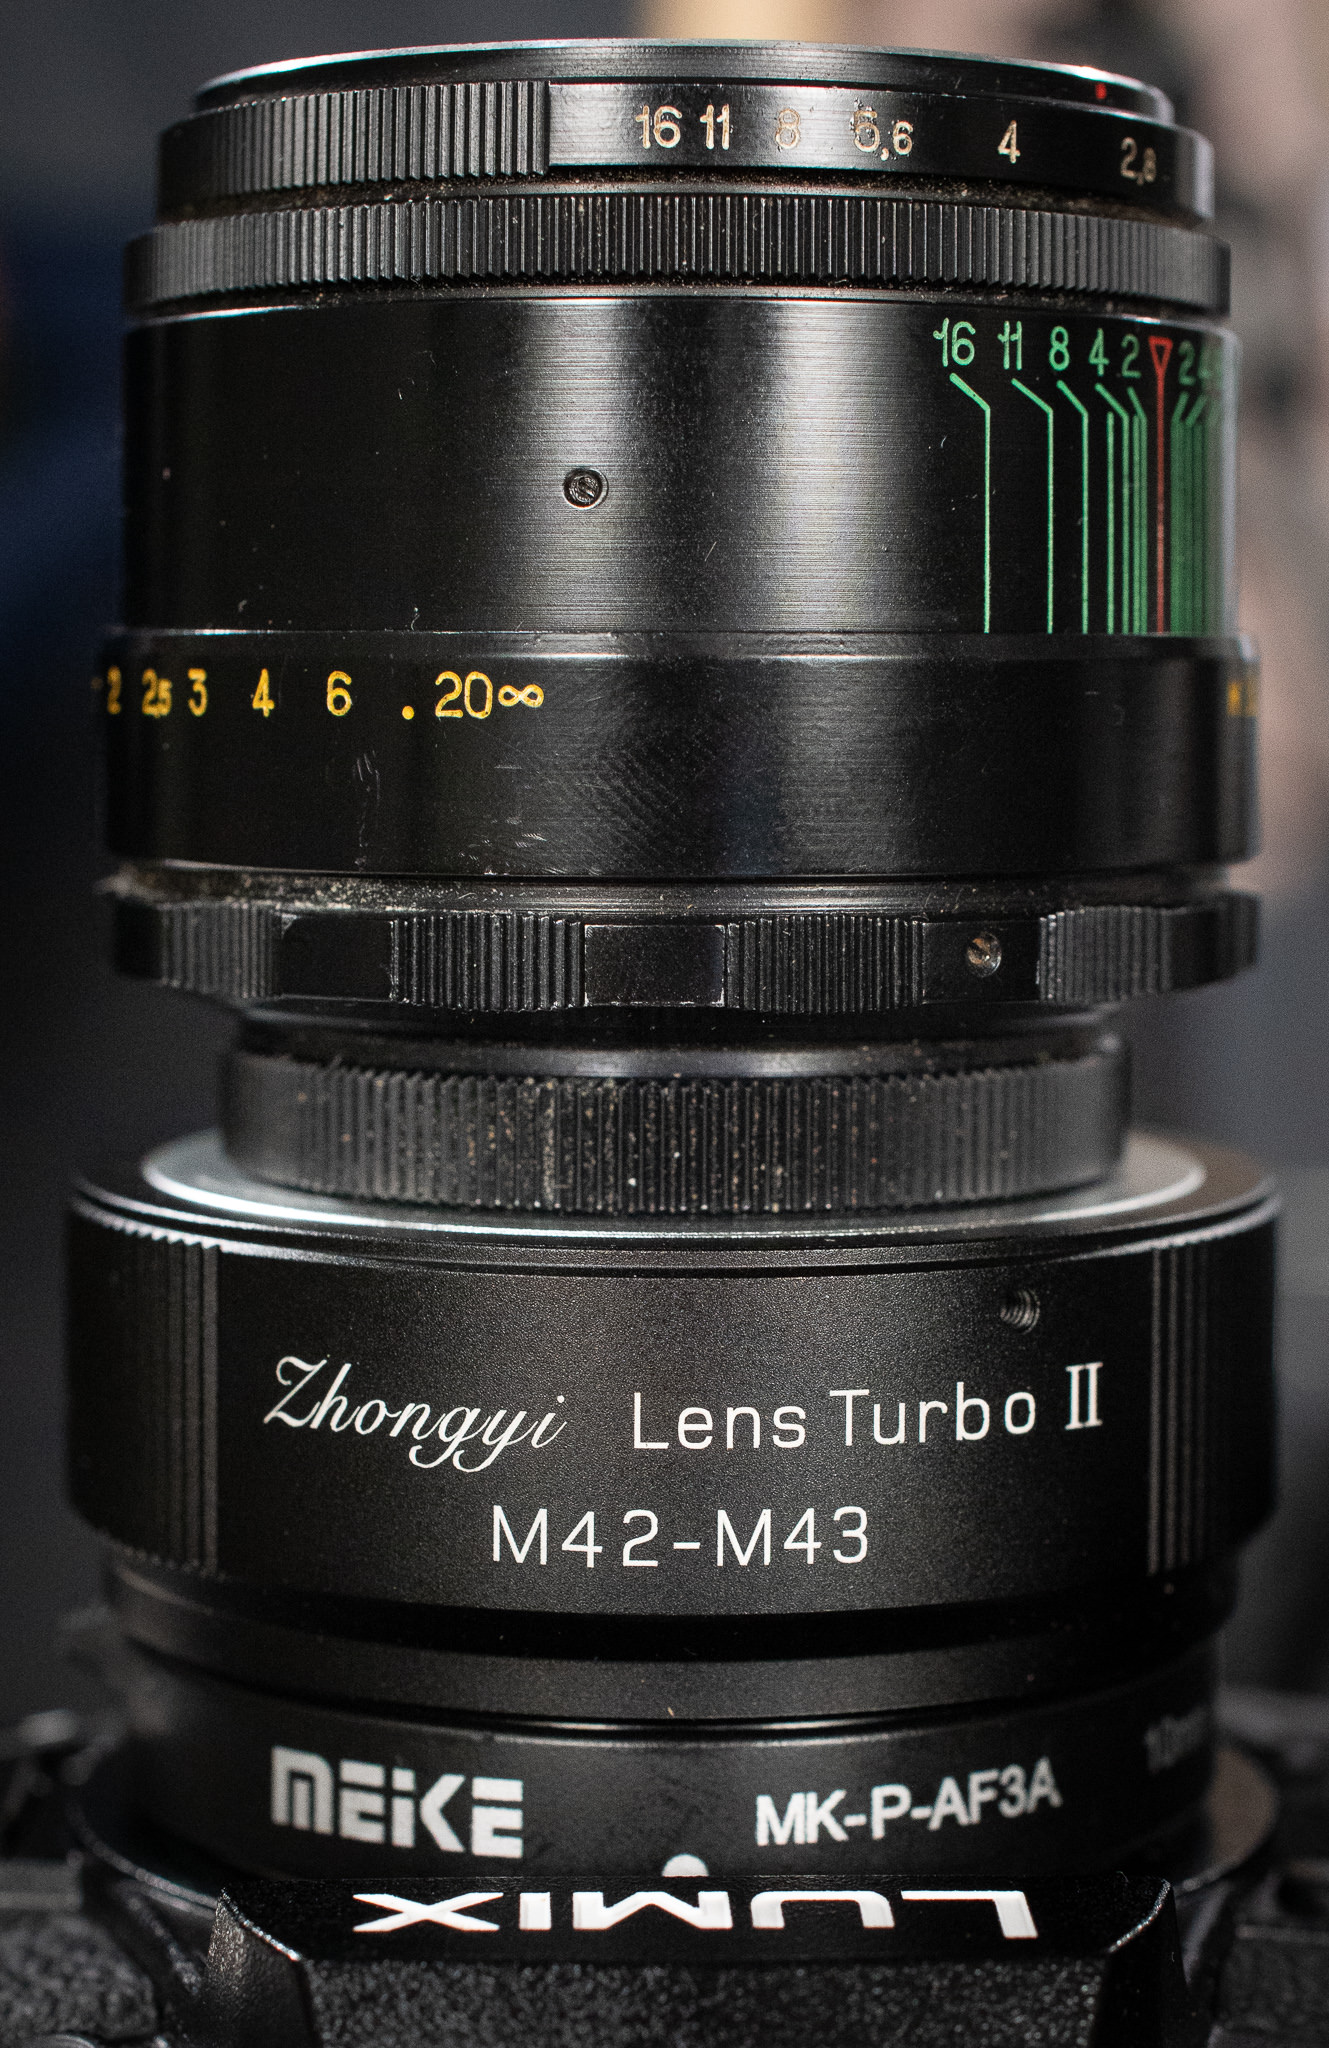 The Russian Helios 44-2 2/58 and Zhongyi M42 to M43 adapter and the Meike macro extension tubes on a LUMIX G9